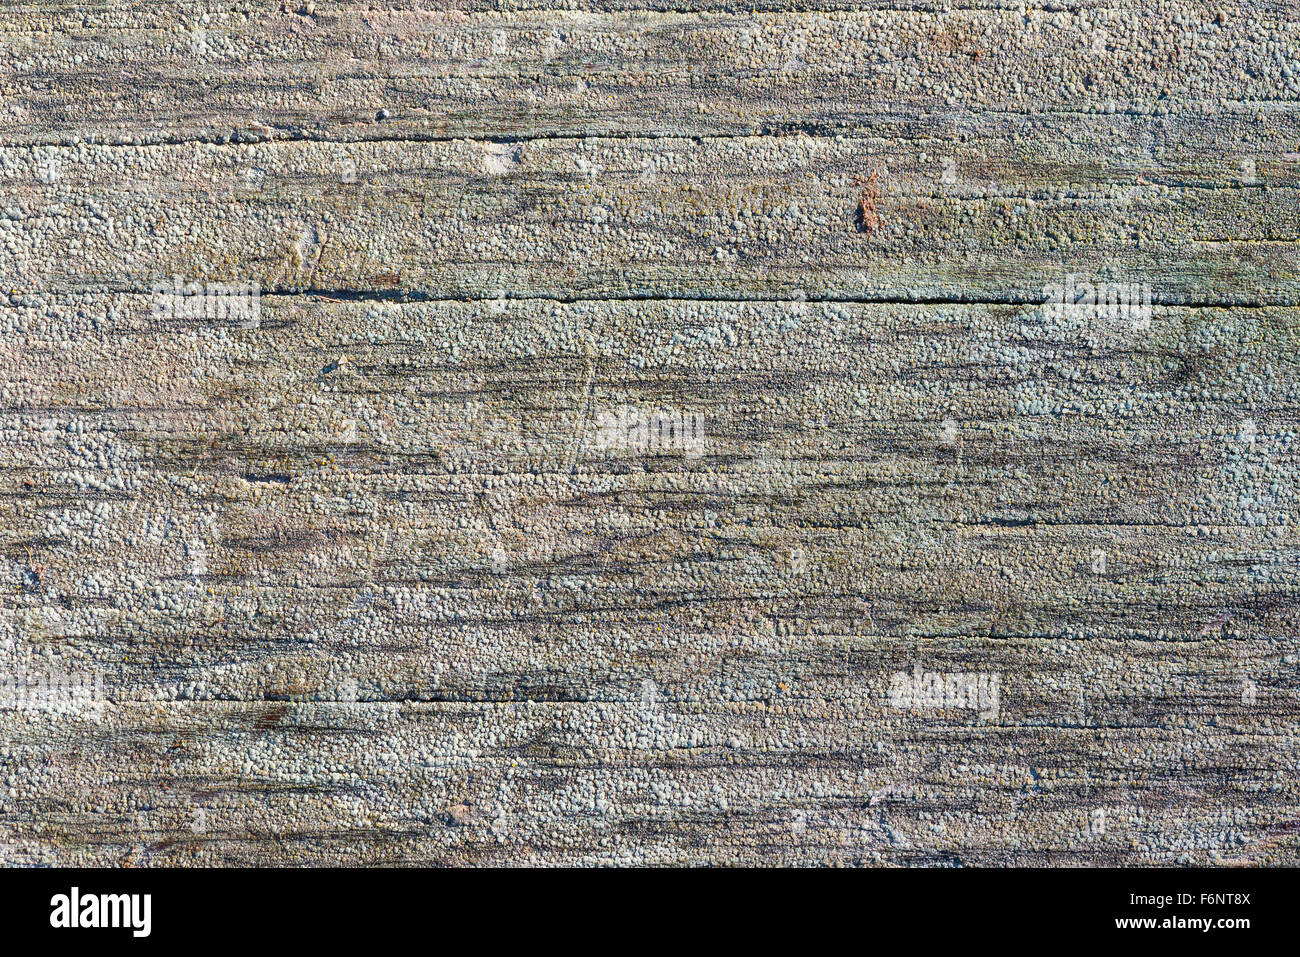 Closeup of old wood surface details Stock Photo